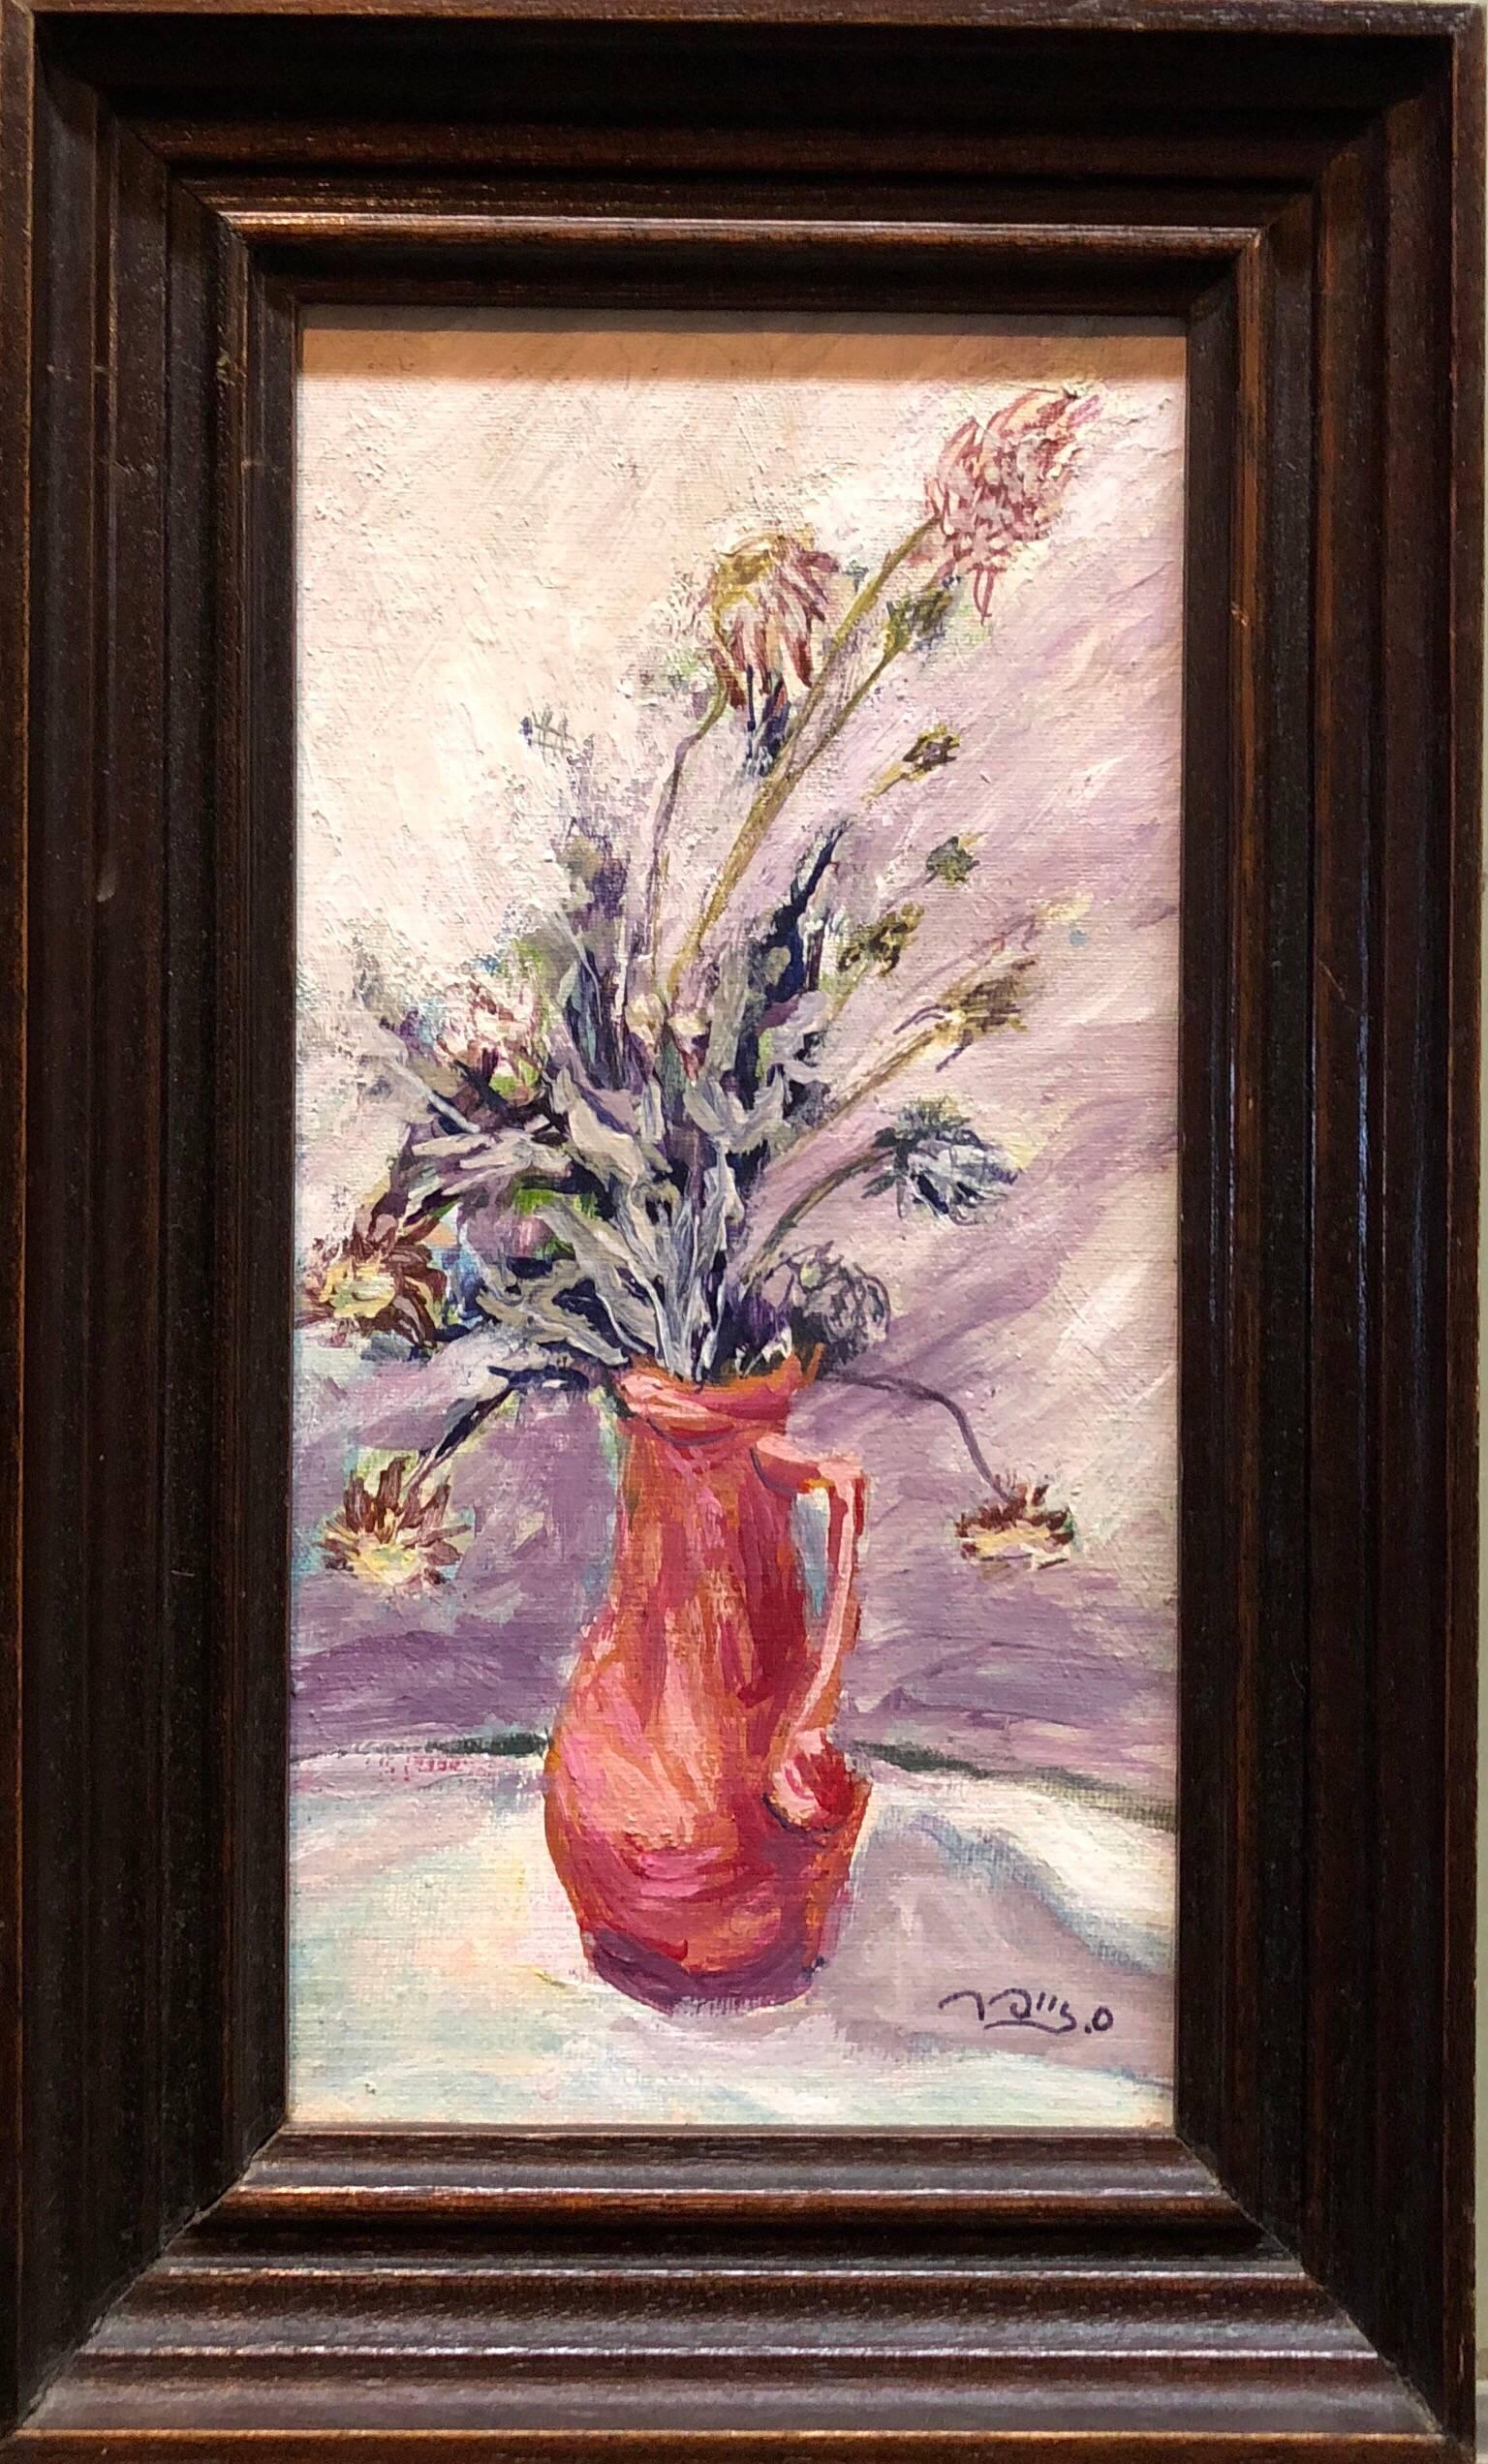 signed in Hebrew. this is a charming Judaica painting of a vase with a bouquet of  flowers. it is signed Zeiffer or Zaipher. it has an Expressionist quality to it reminiscent of the works of Yosl Bergner.
